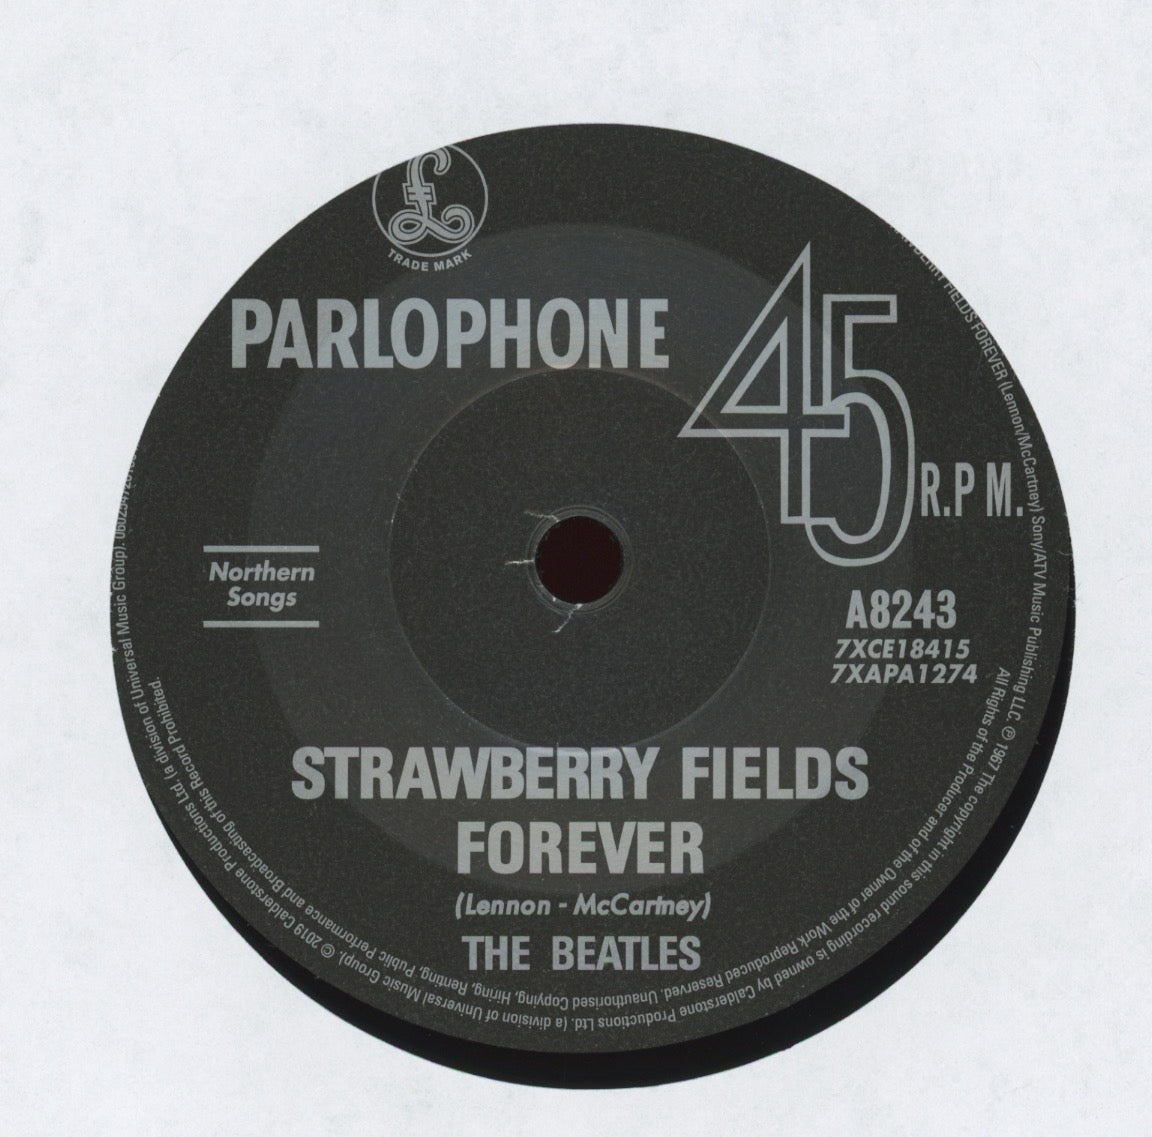 The Beatles - Strawberry Fields Forever / Penny Lane on Parlophone 7" Reissue With Picture Cover